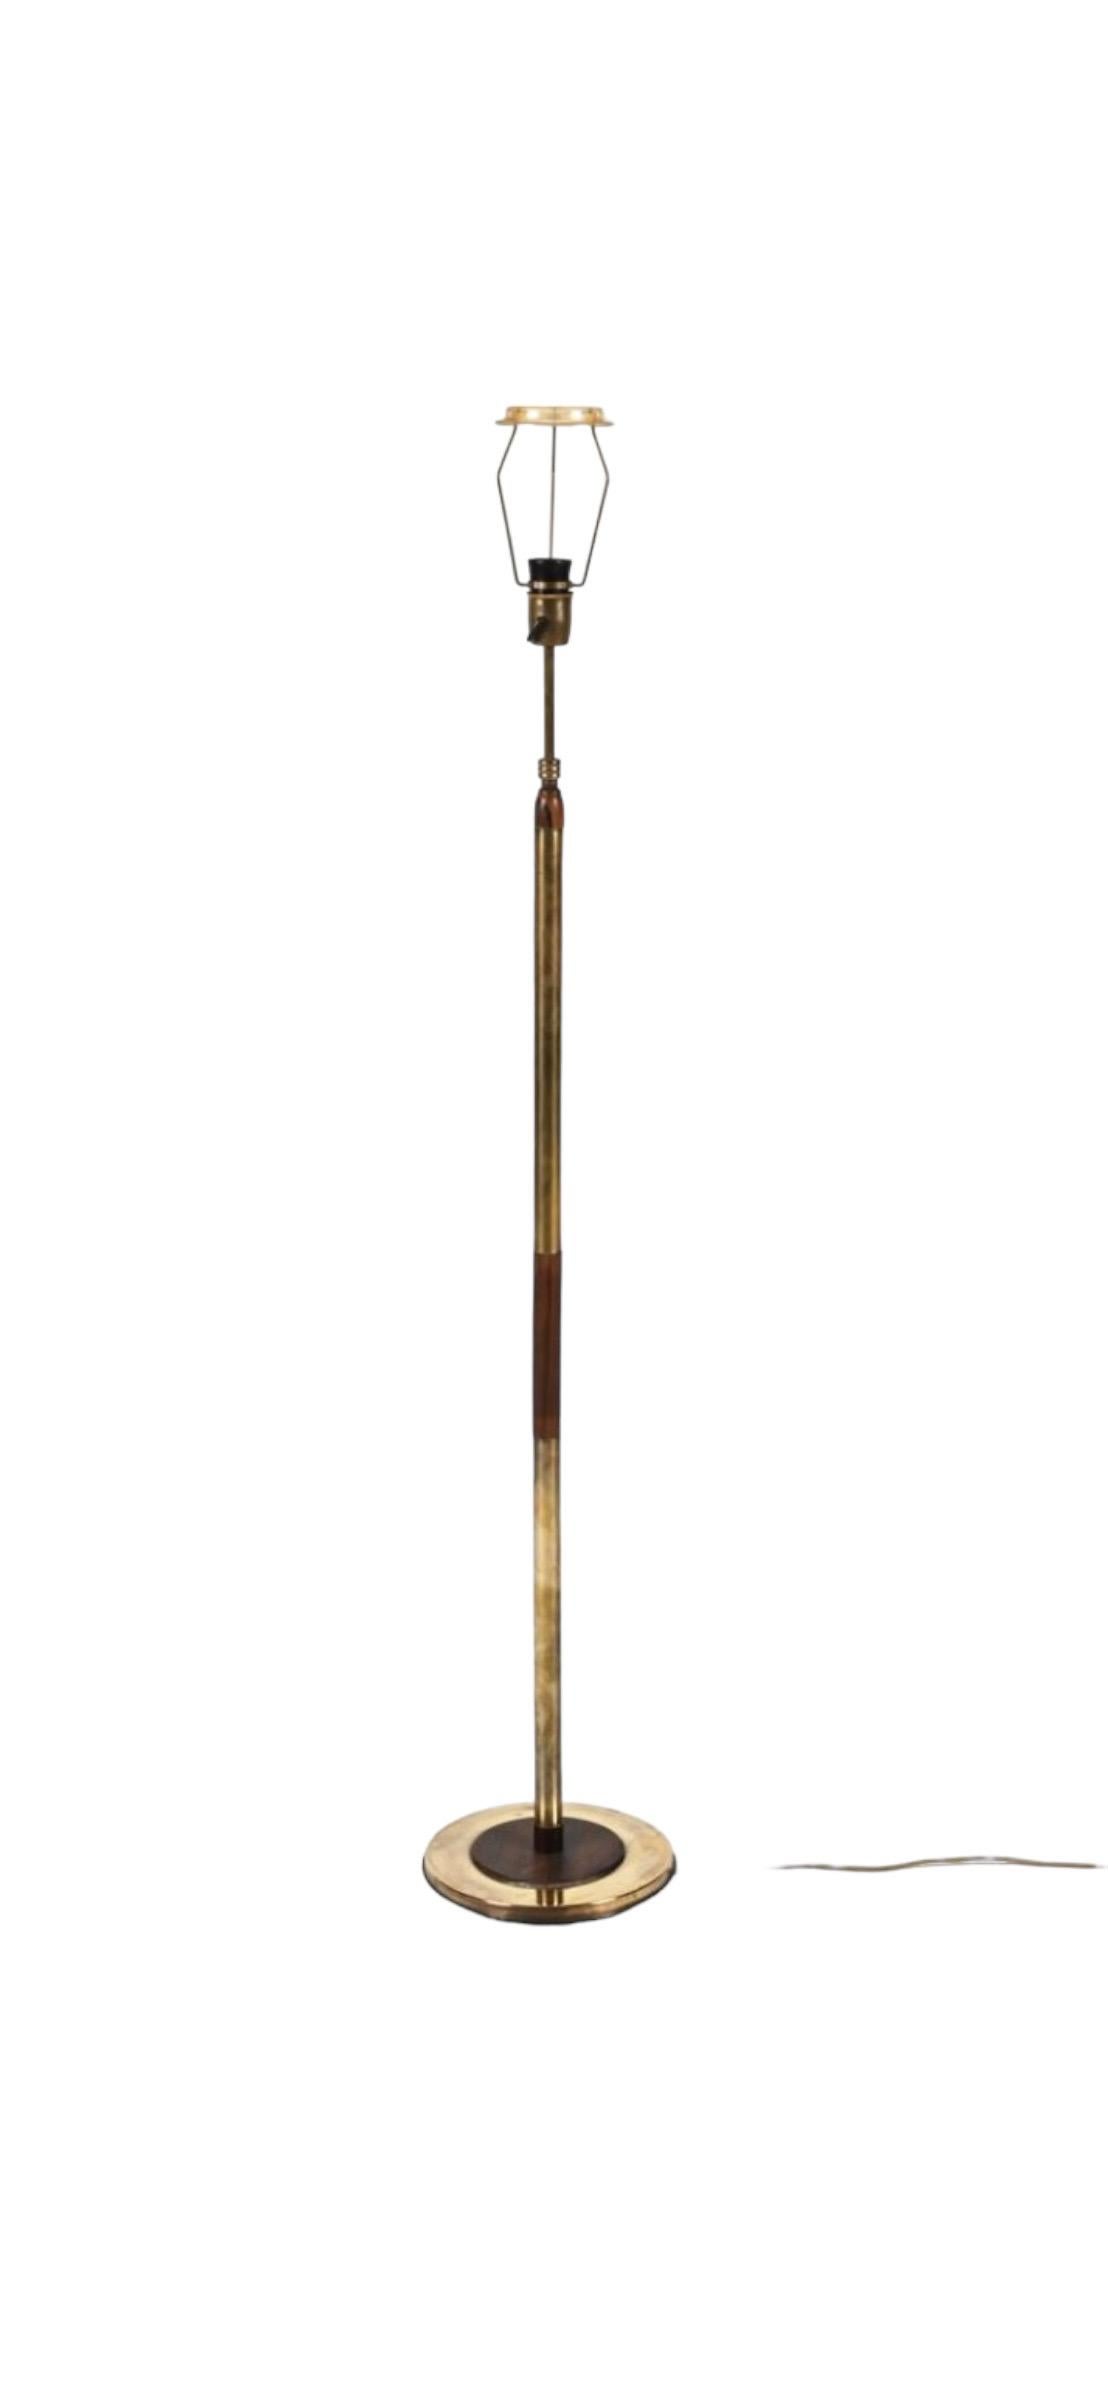 Elegant and unique mid century modern floor lamp. Executed in brass and Brazilian rosewood, in a rare combination of classic materials from the era. Originally of European origin. The height of the lamp is adjustable, hidden by a creative internal